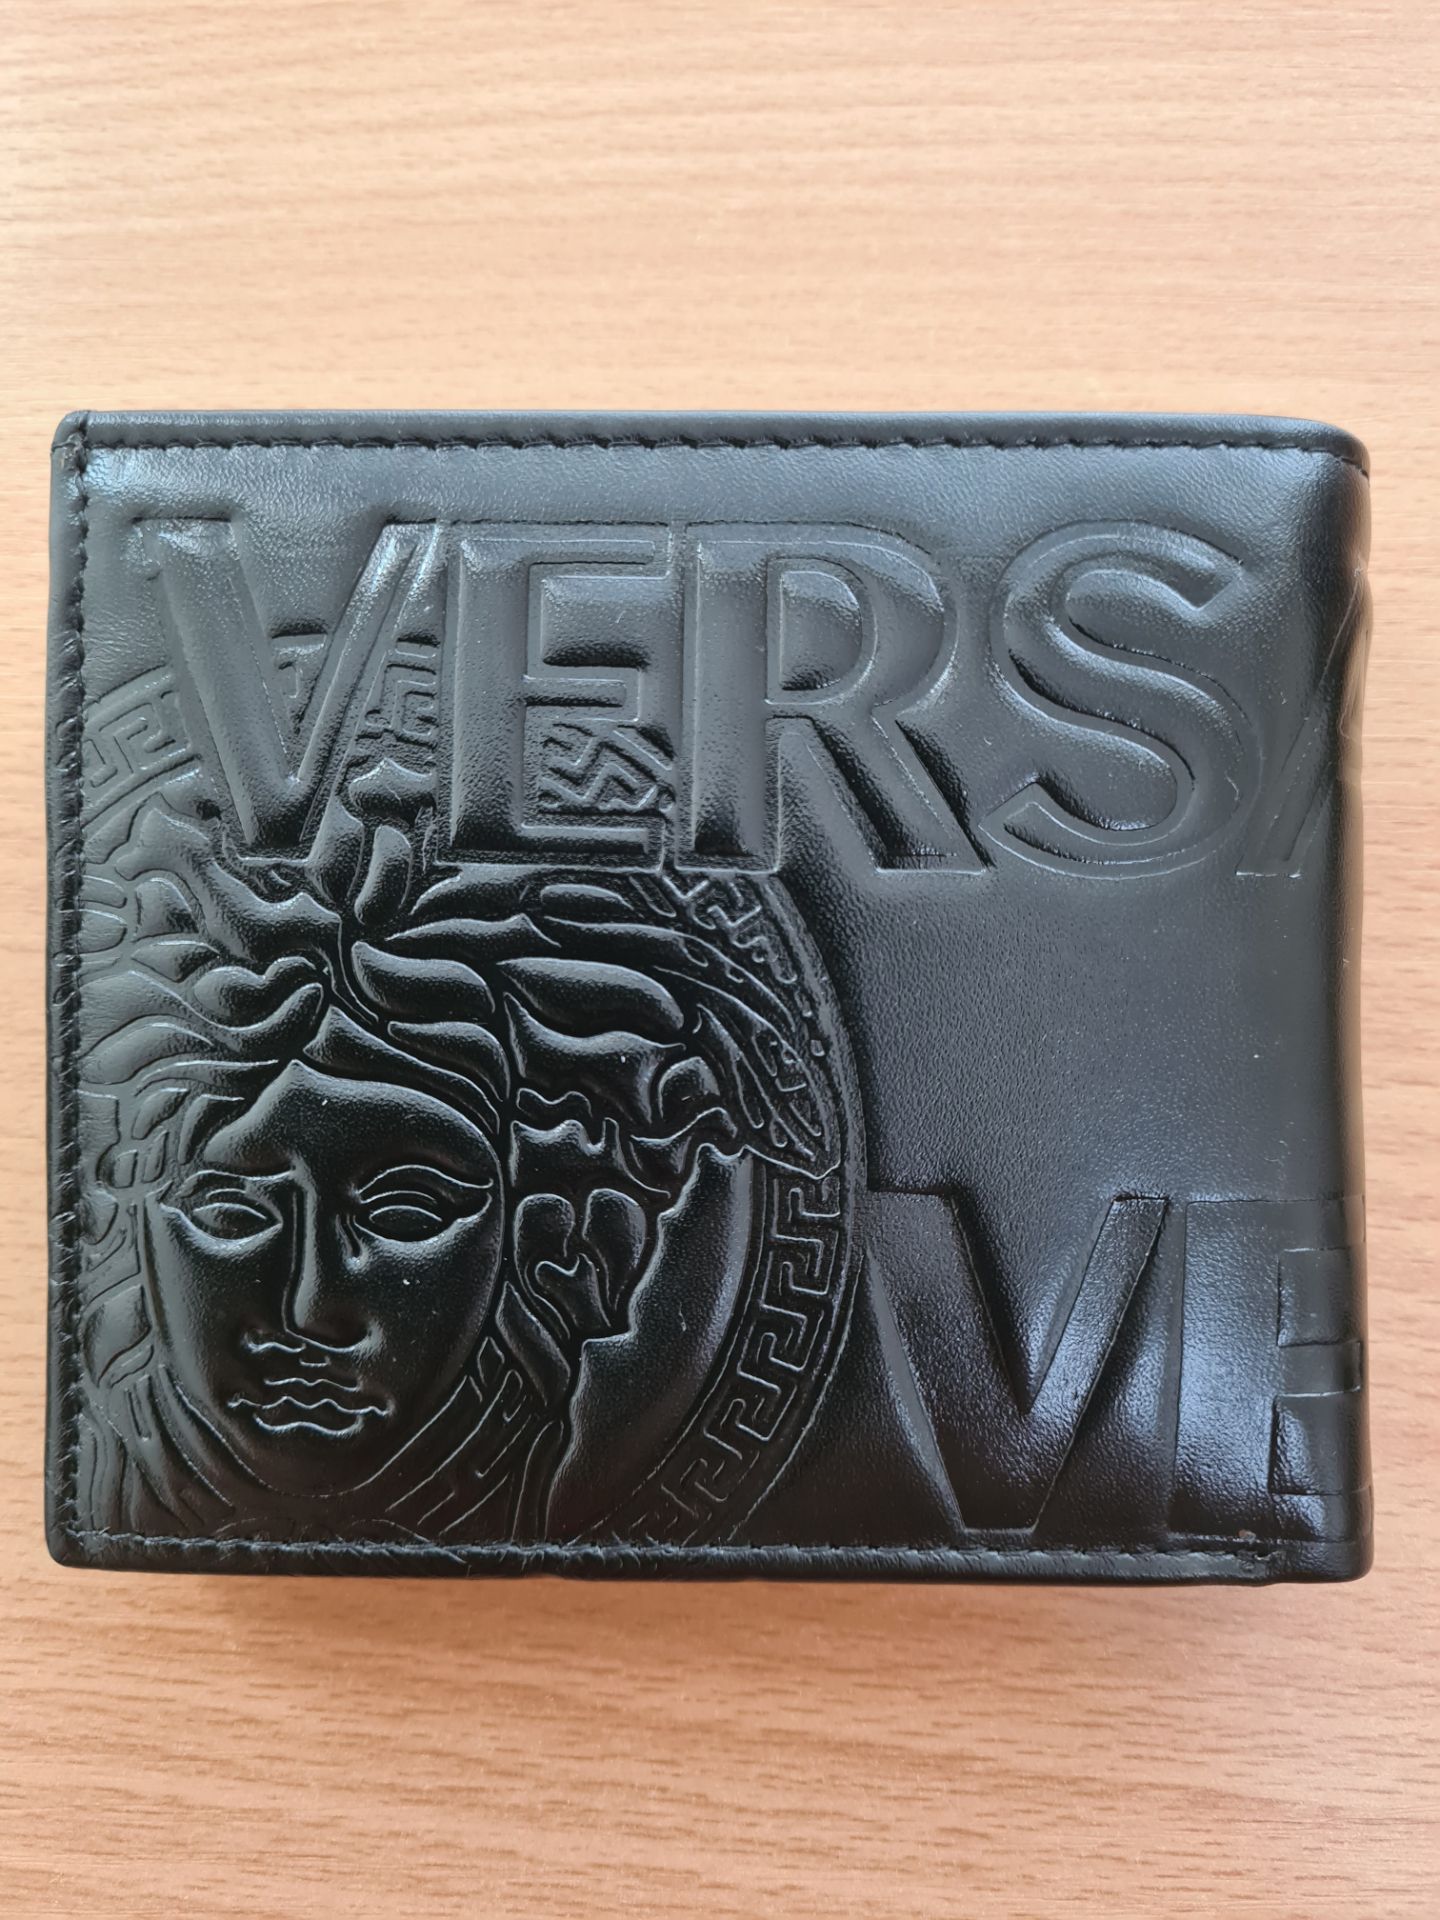 versace men's leather wallet - new with box - Image 2 of 8